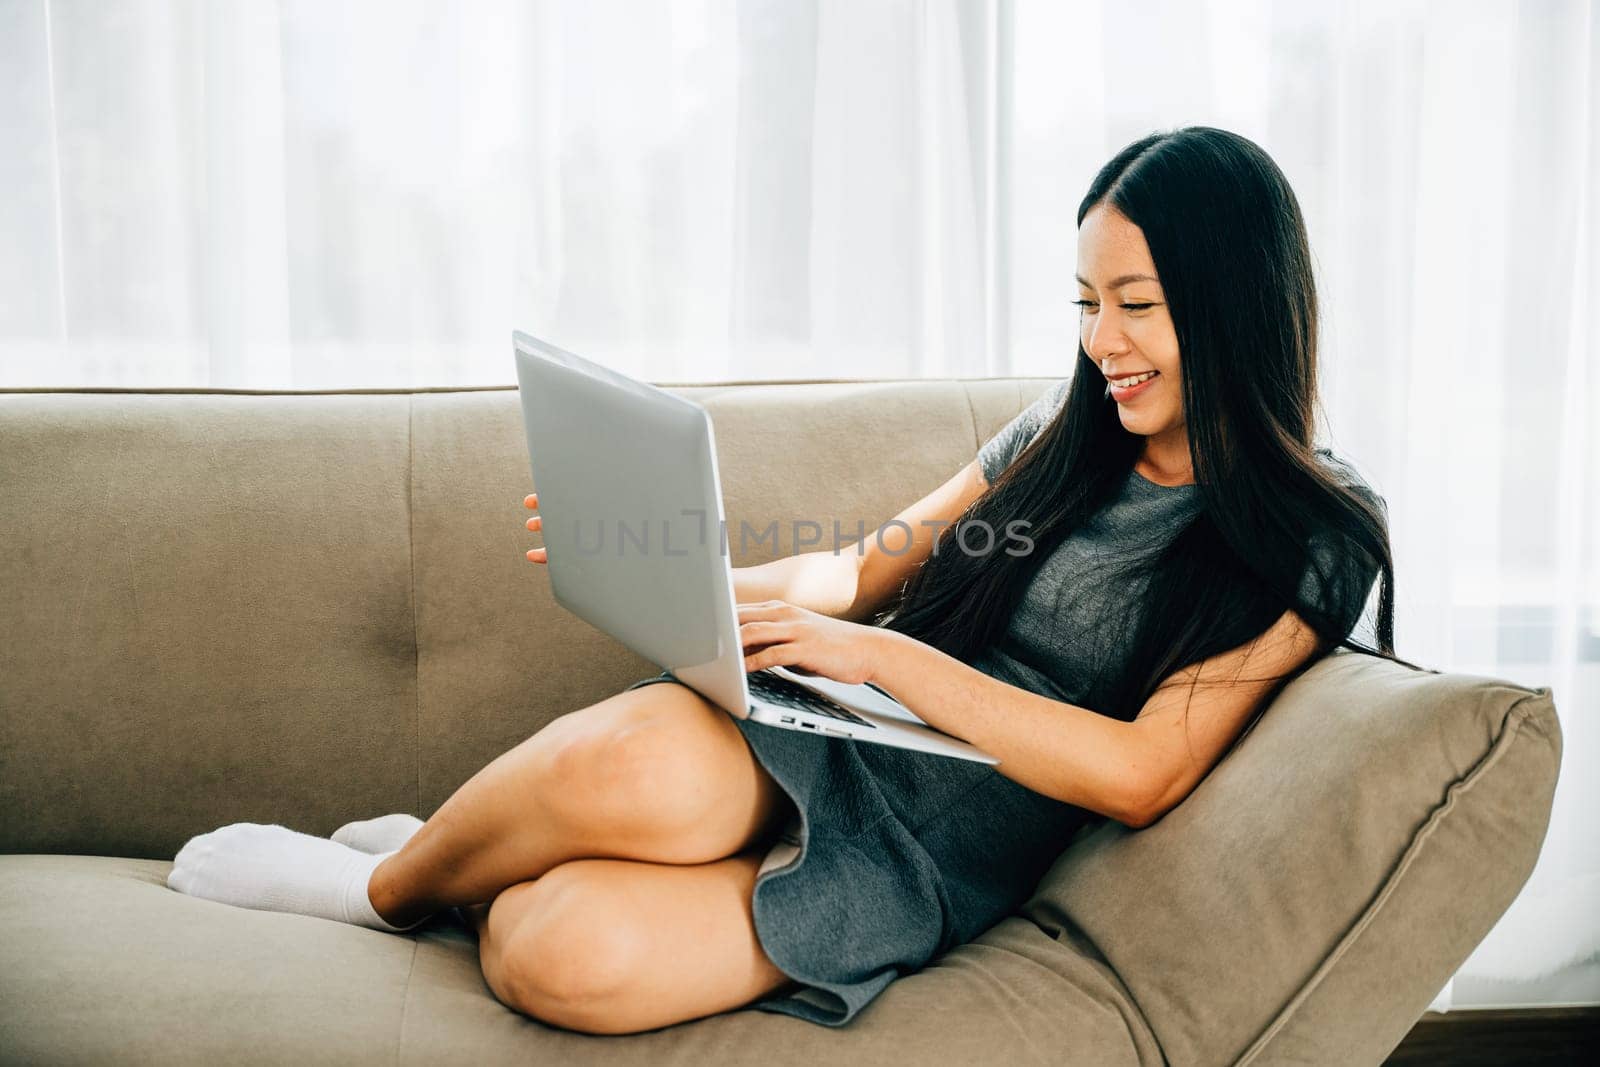 Woman on sofa enjoys using laptop for ecommerce learning watching videos by Sorapop